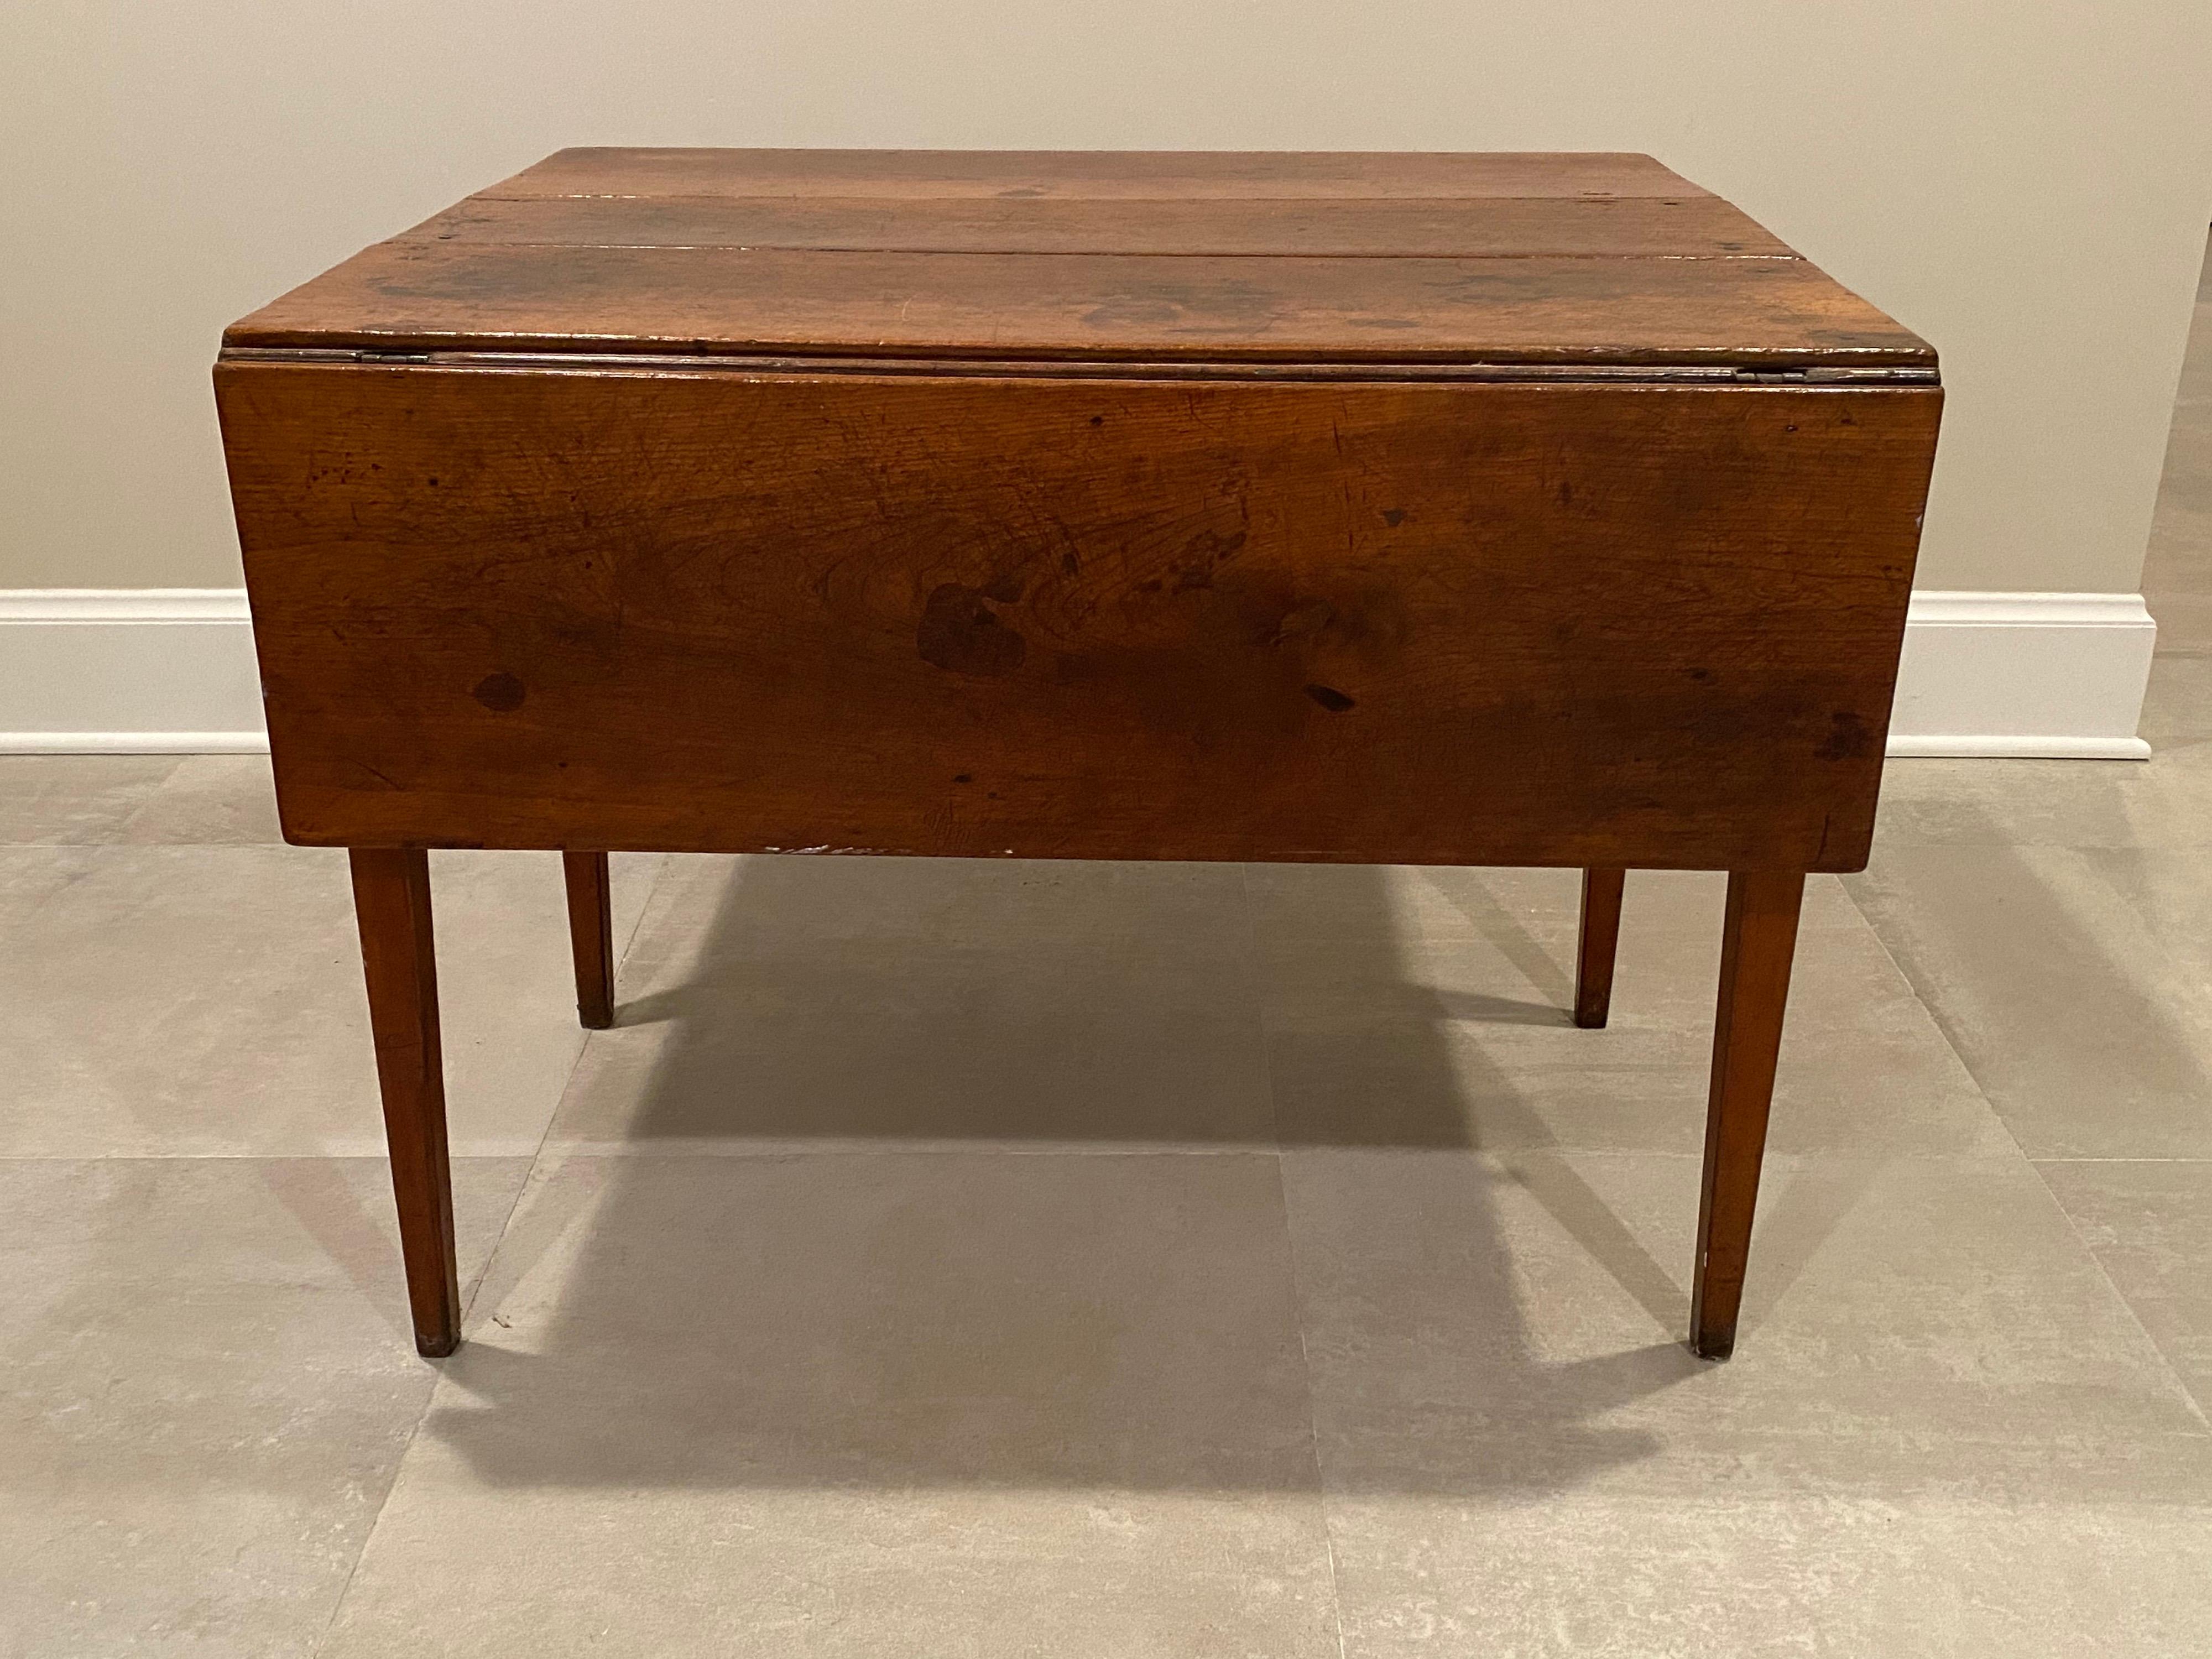 19th Century American Mahogany Drop-Leaf Table For Sale 5